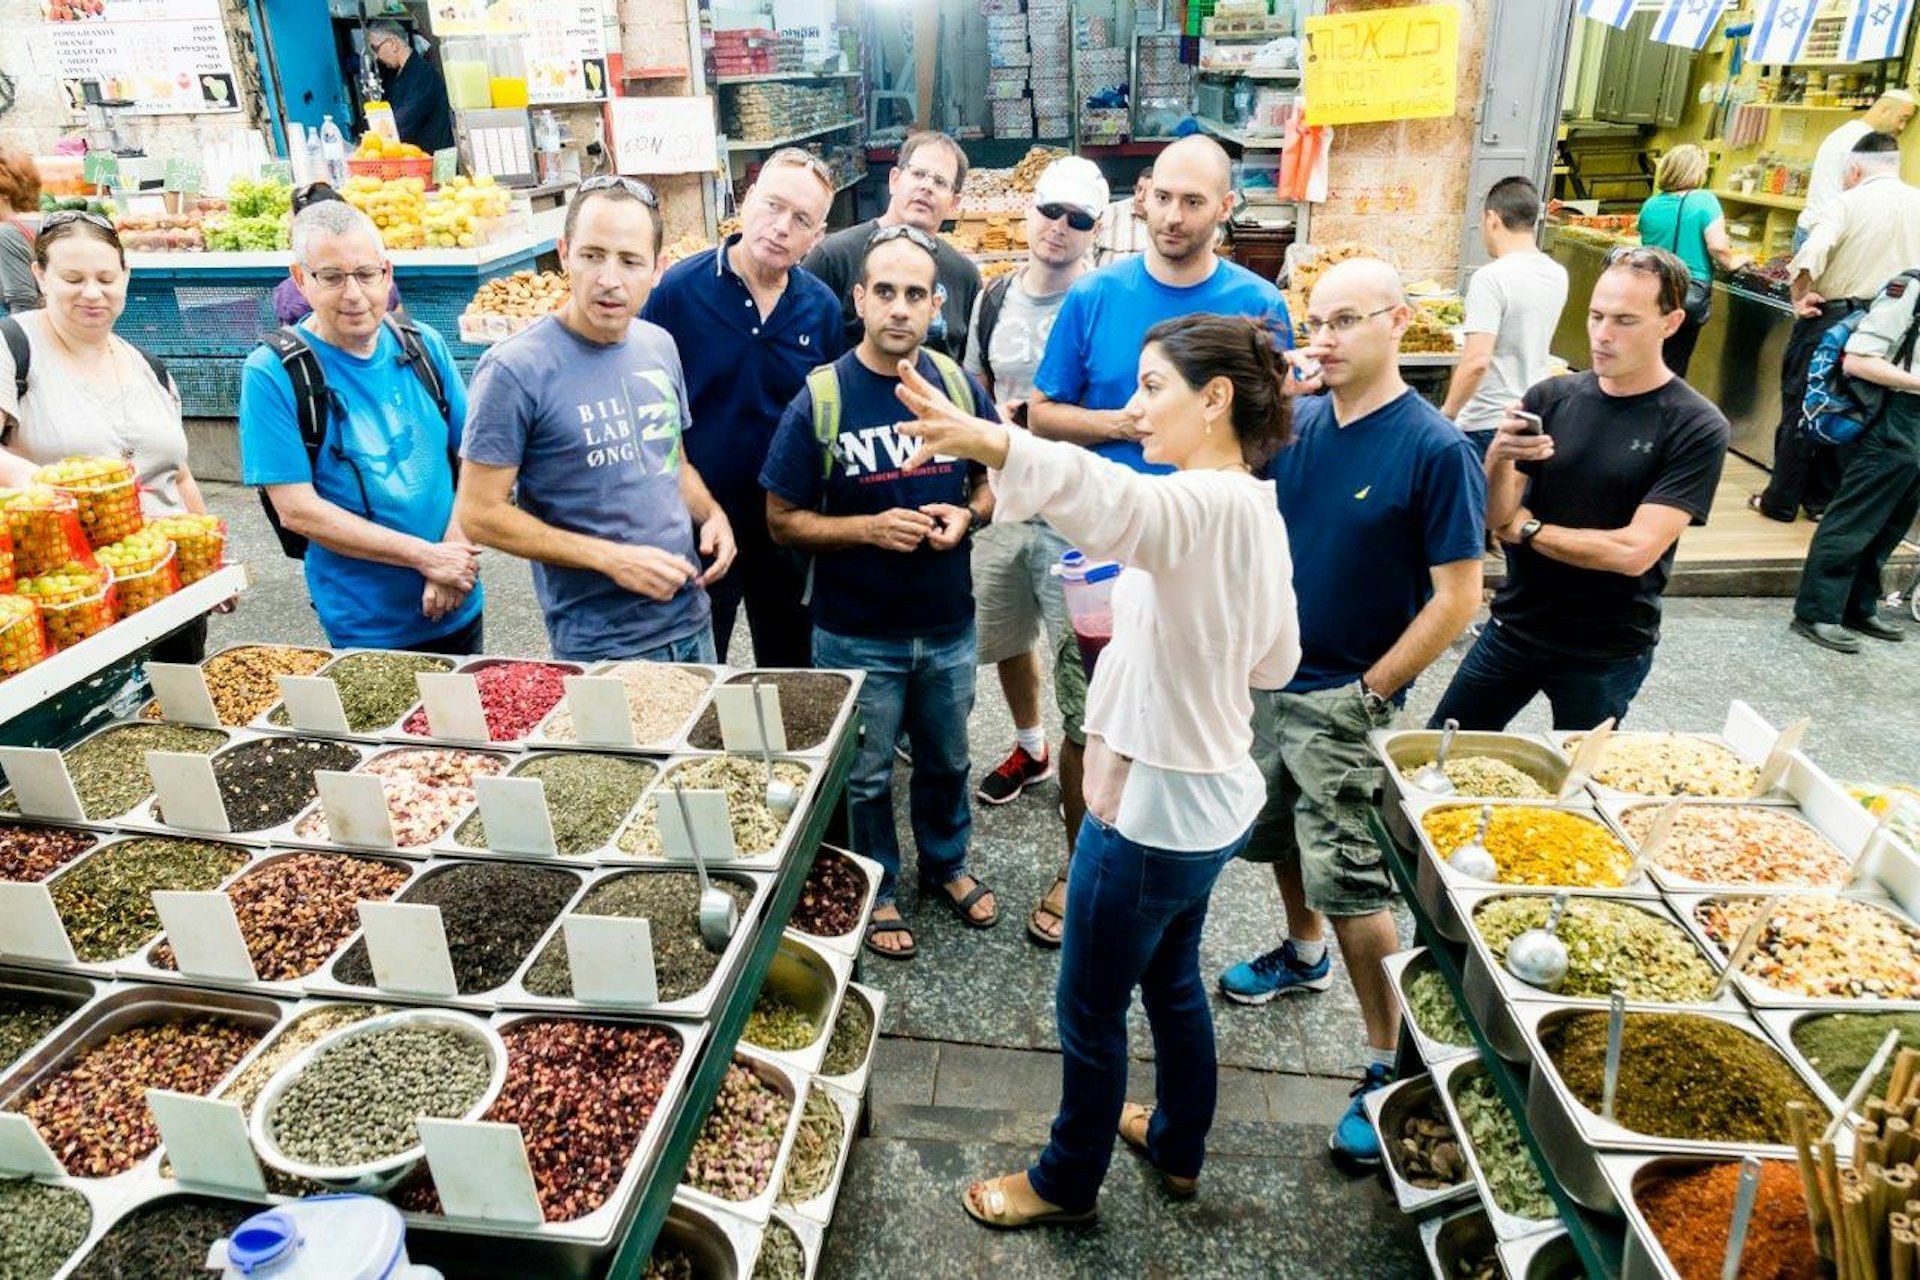 The Atelier offers food tours of Mahane Yehuda market in Jerusalem. Image by The Atelier